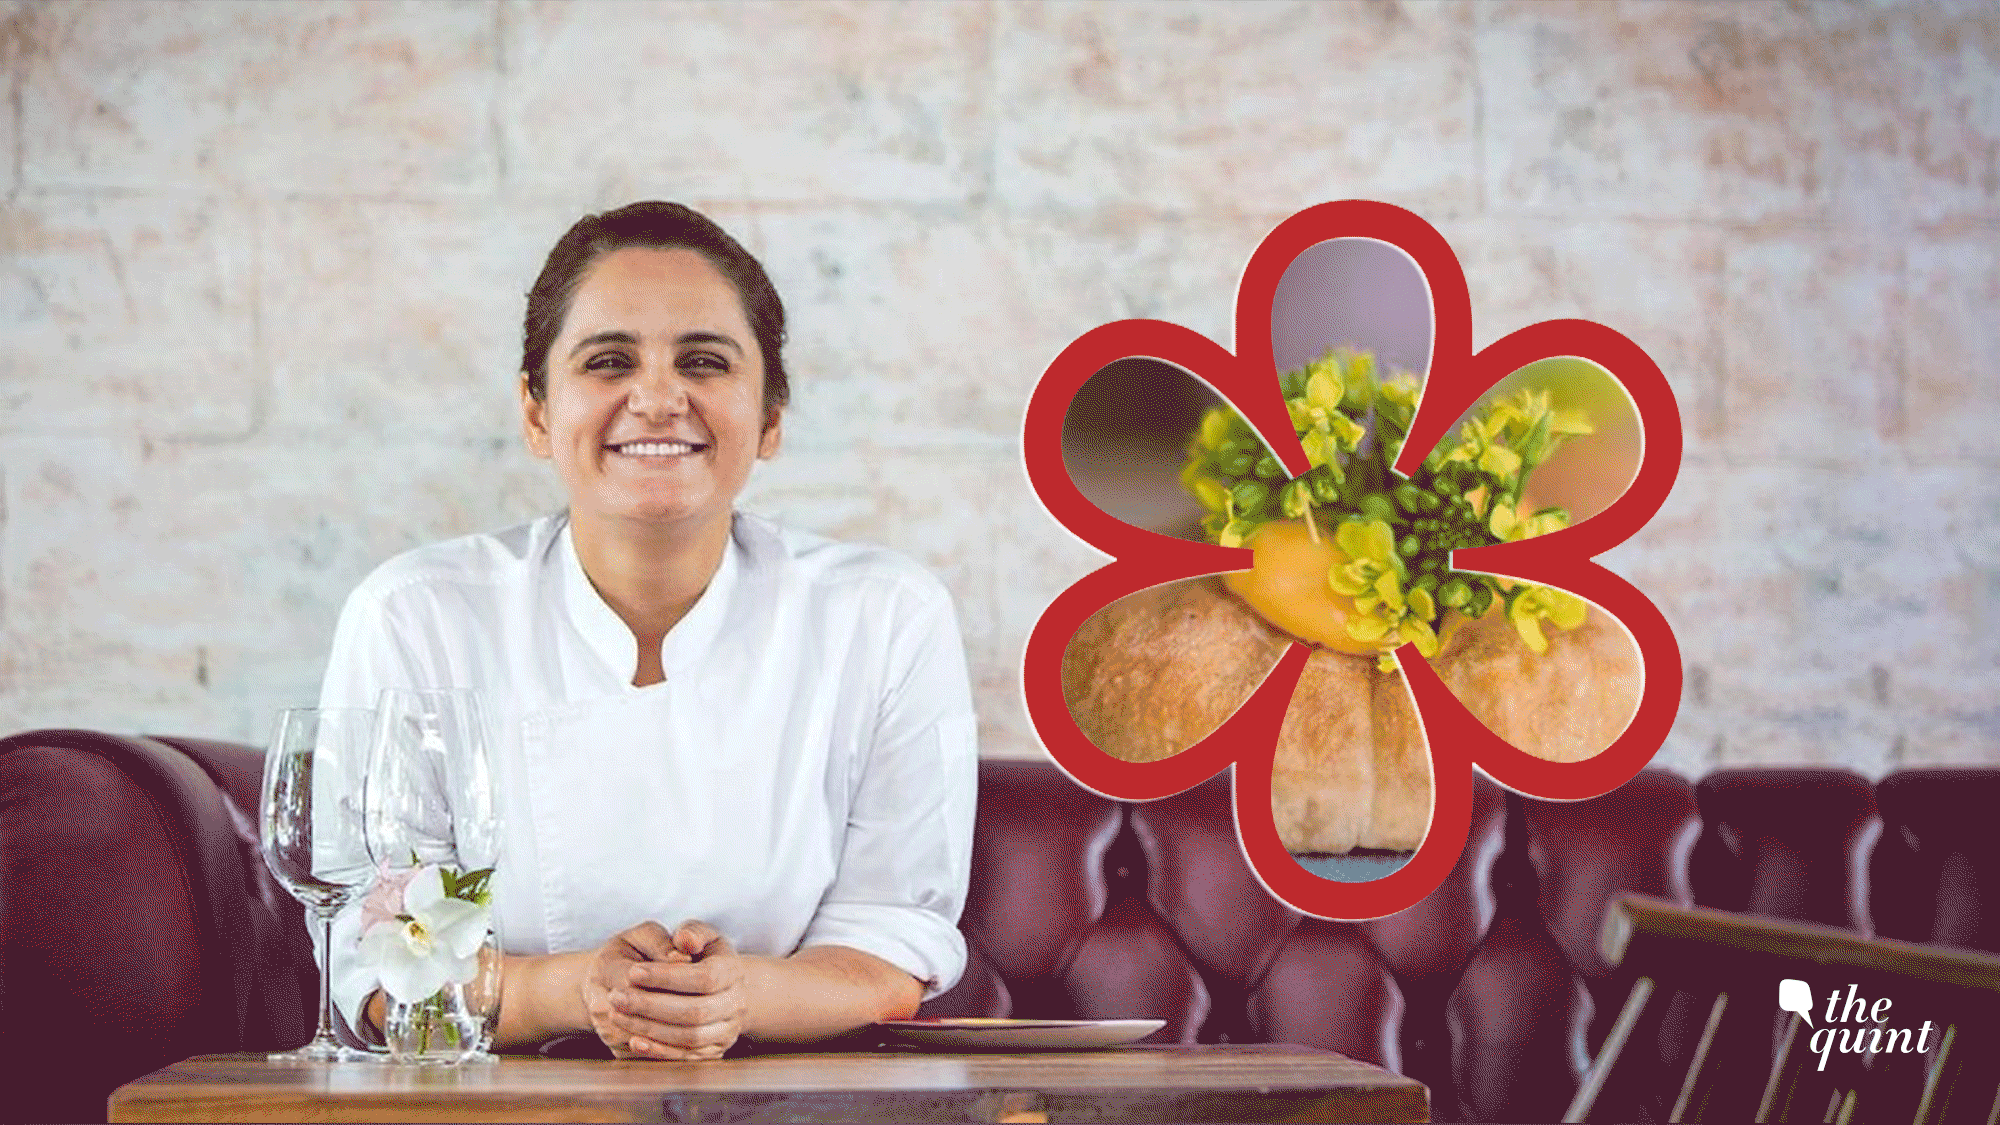 Chef Garima Arora became the first Indian woman to win a Michelin star.